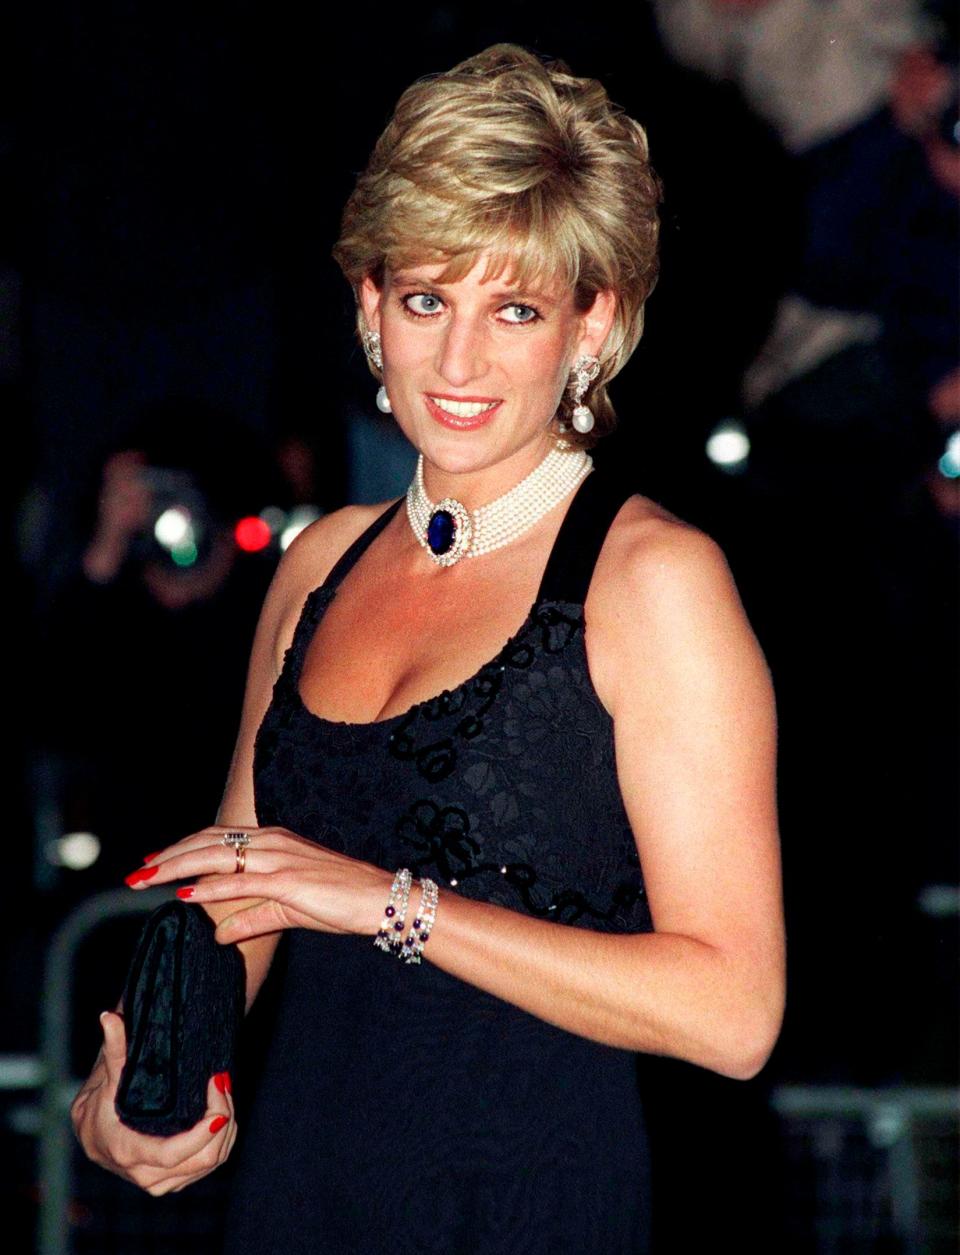 Princess Diana is a pioneer of fit mom arms